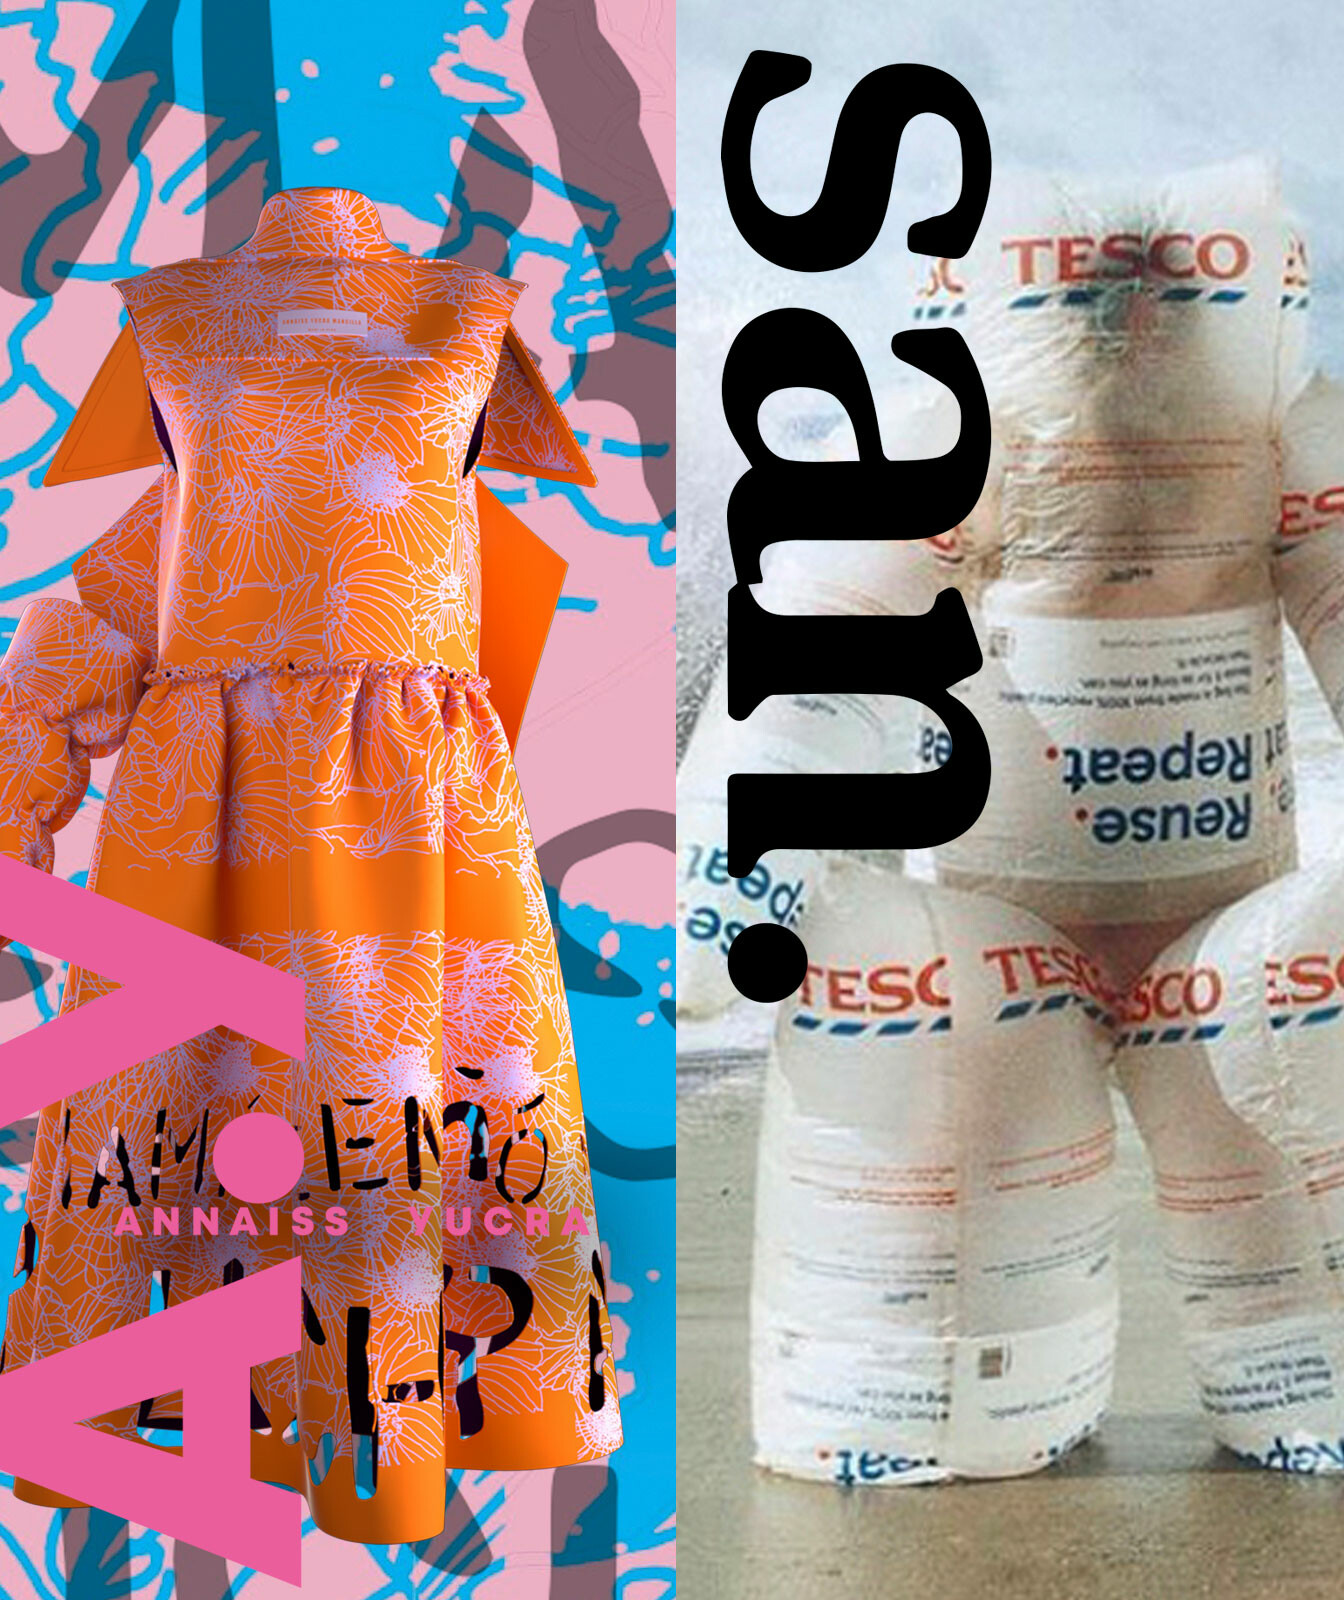 A composite image showing the two designs of different designers - on the left, an orange neoprene dress that looks like a backwards trench coat, with the name "Annaiss Yucra" over it; on the right, a faceless inflatable creature made out of Tesco grocery bags, with the name "San." over it.